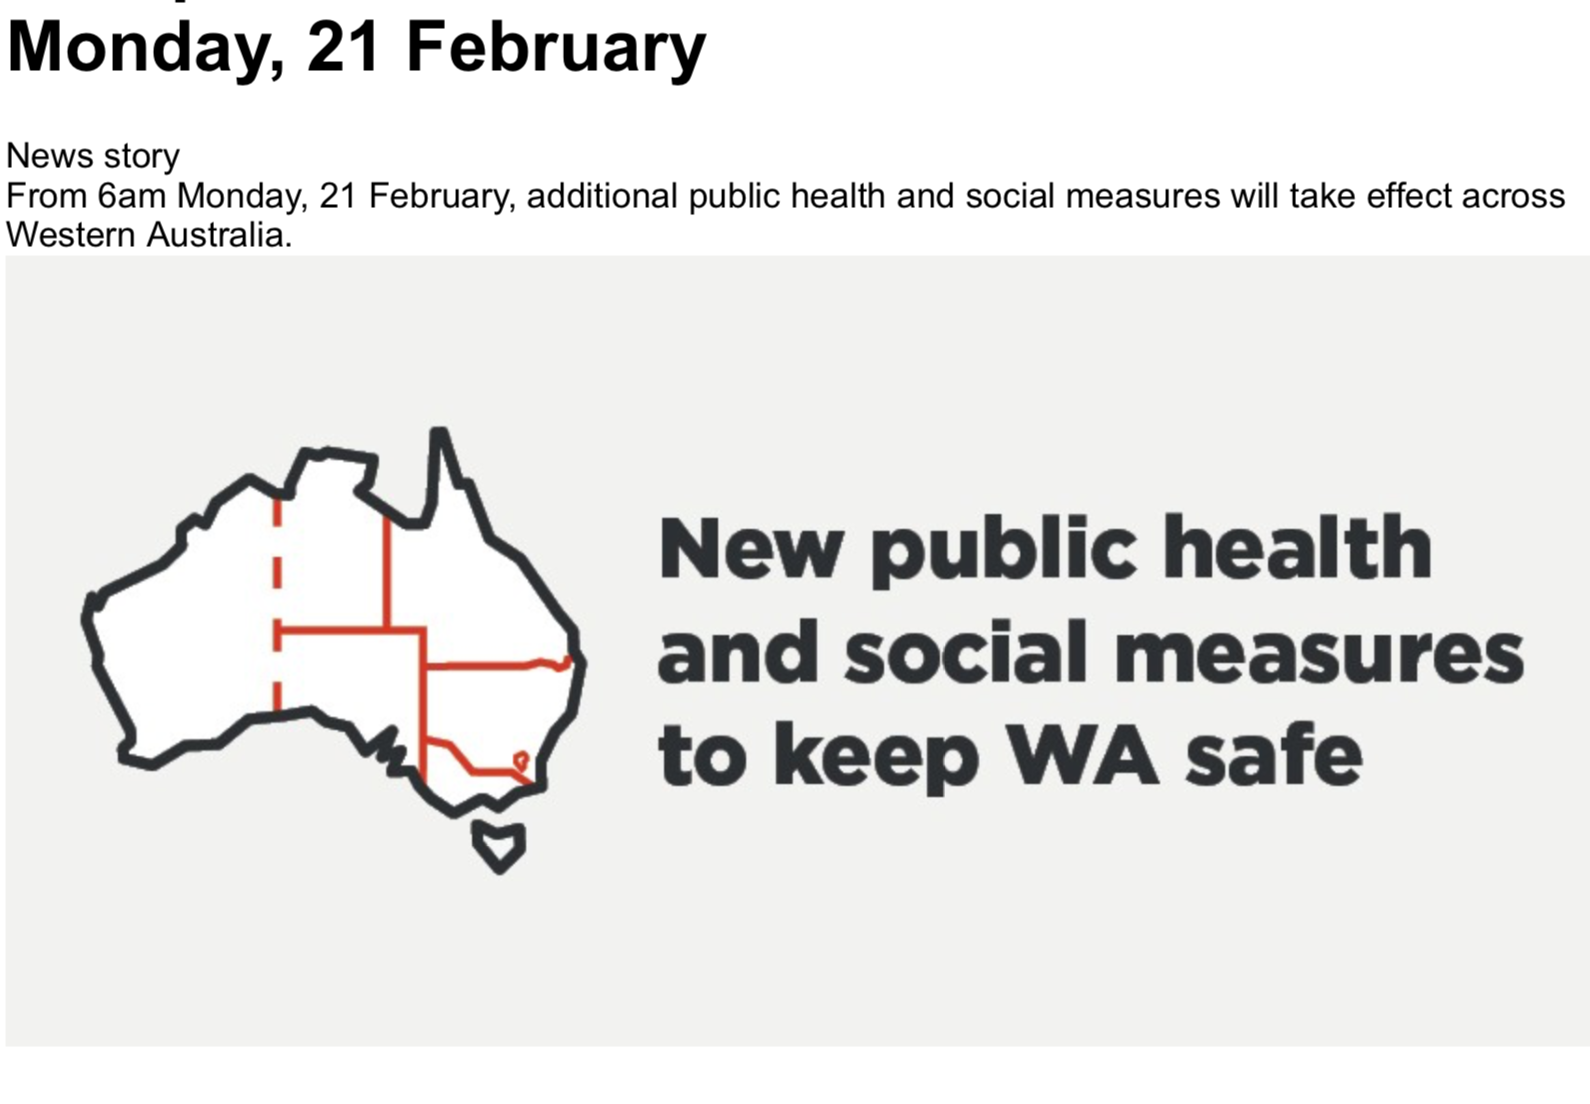 New public health and social measures from Monday 21 February